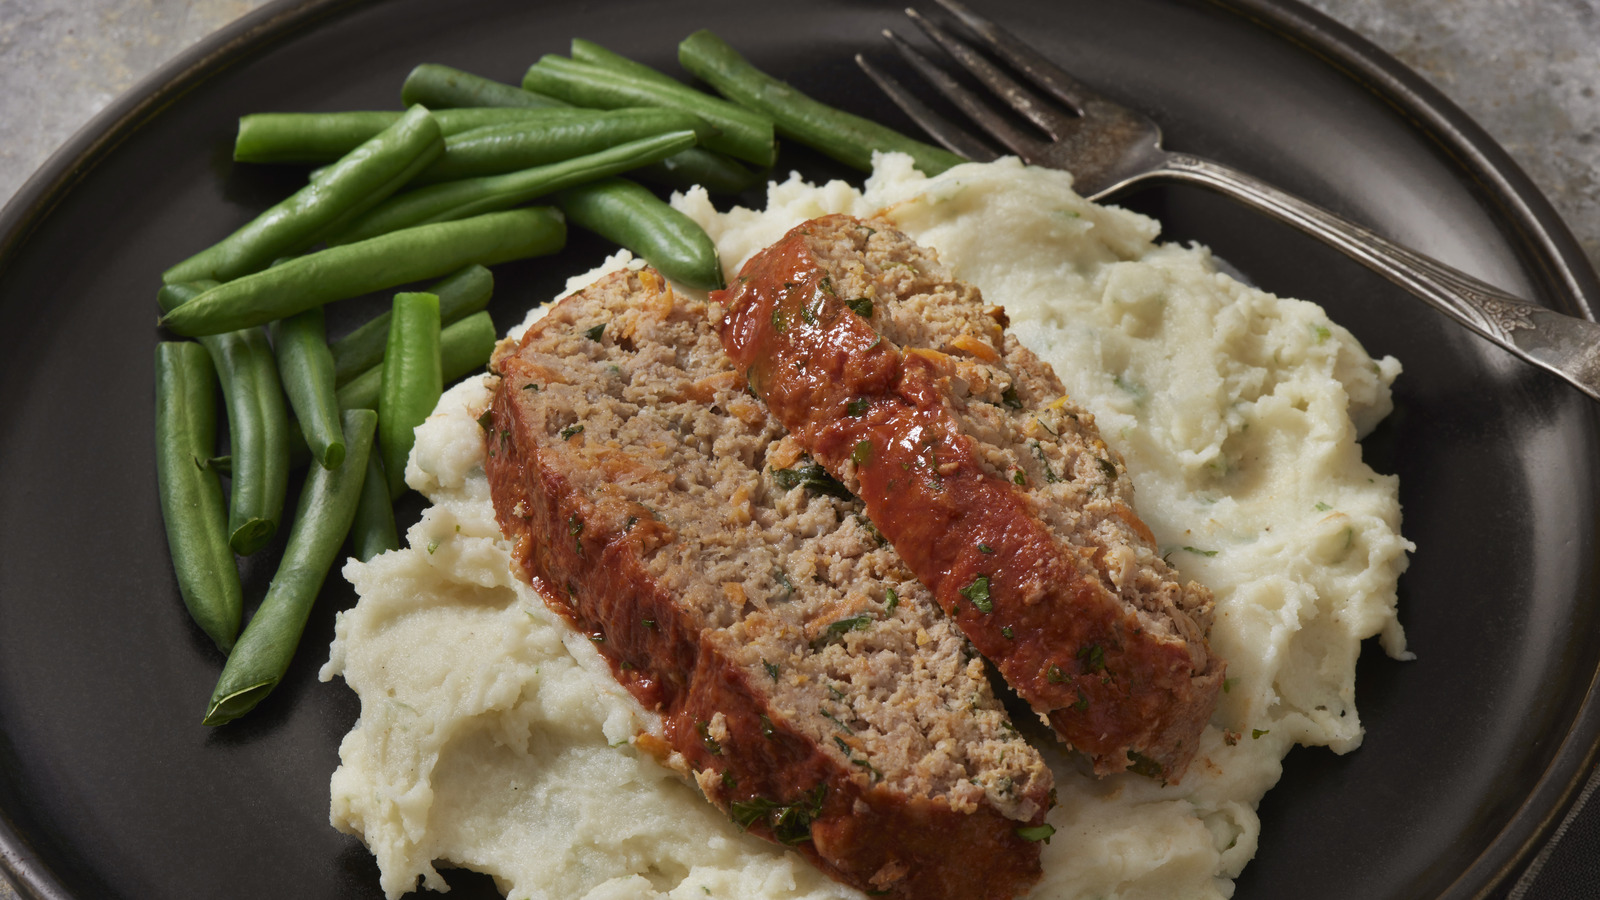 Tip to remember when replacing beef with chicken in meatloaf